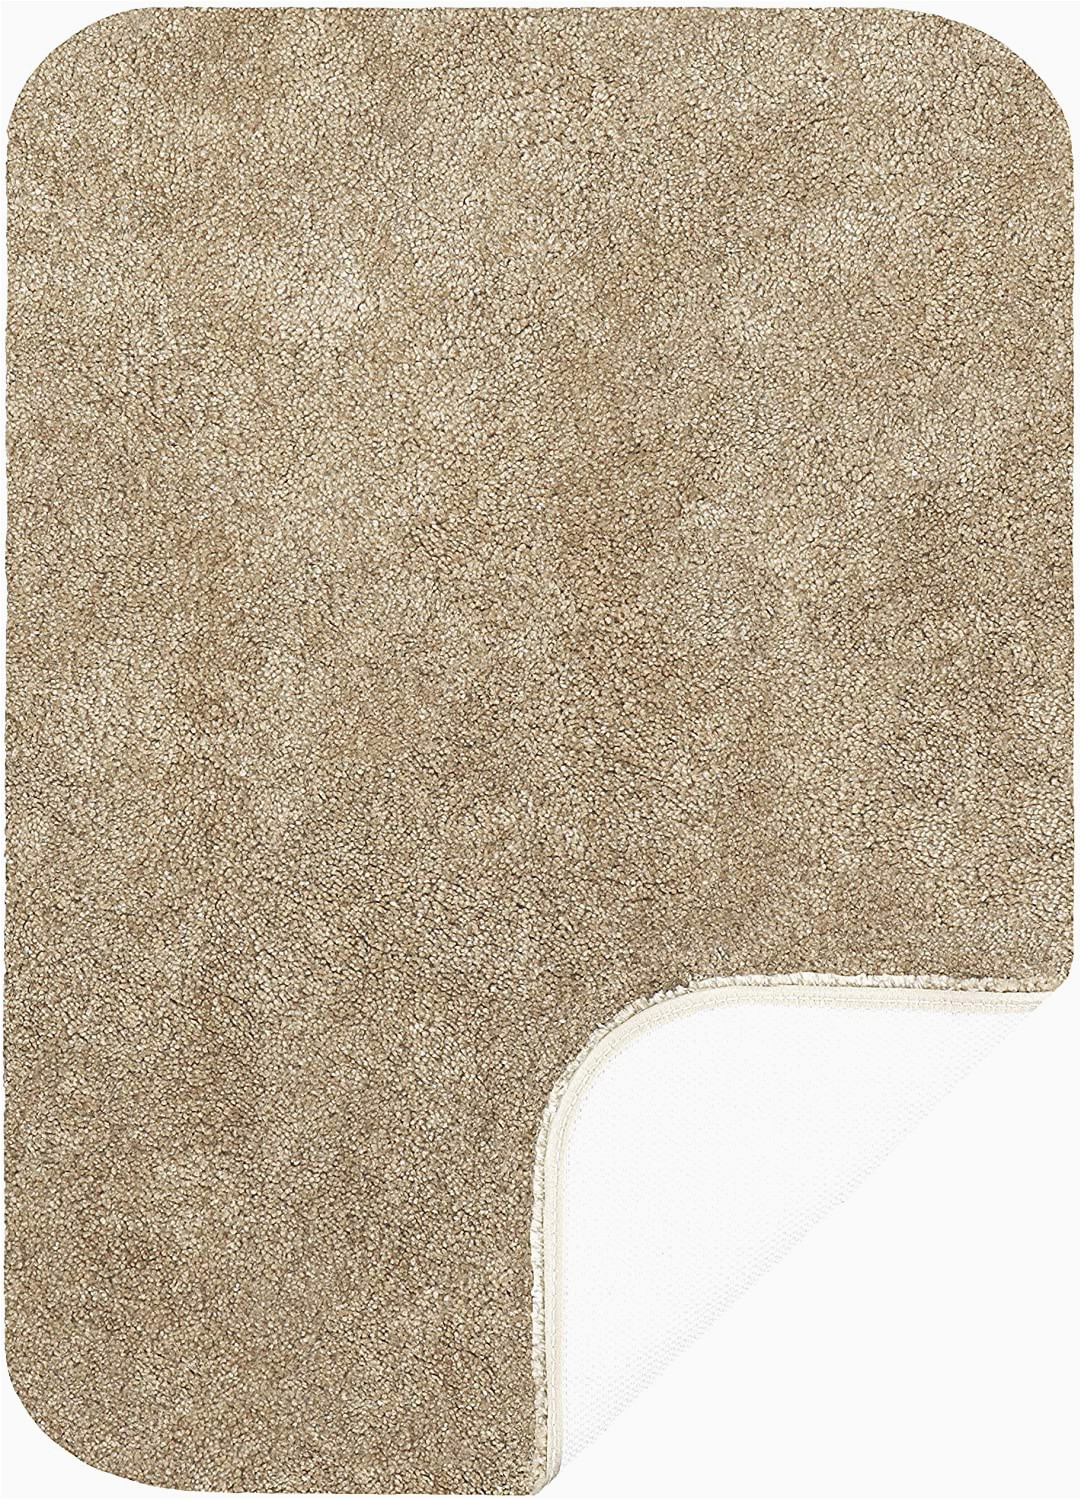 17 X 24 Bathroom Rugs Maples Rugs Colorsoft Non Slip Washable & Quick Dry soft Bathroom Rugs [made In Usa] 17" X 24" Clay Beige